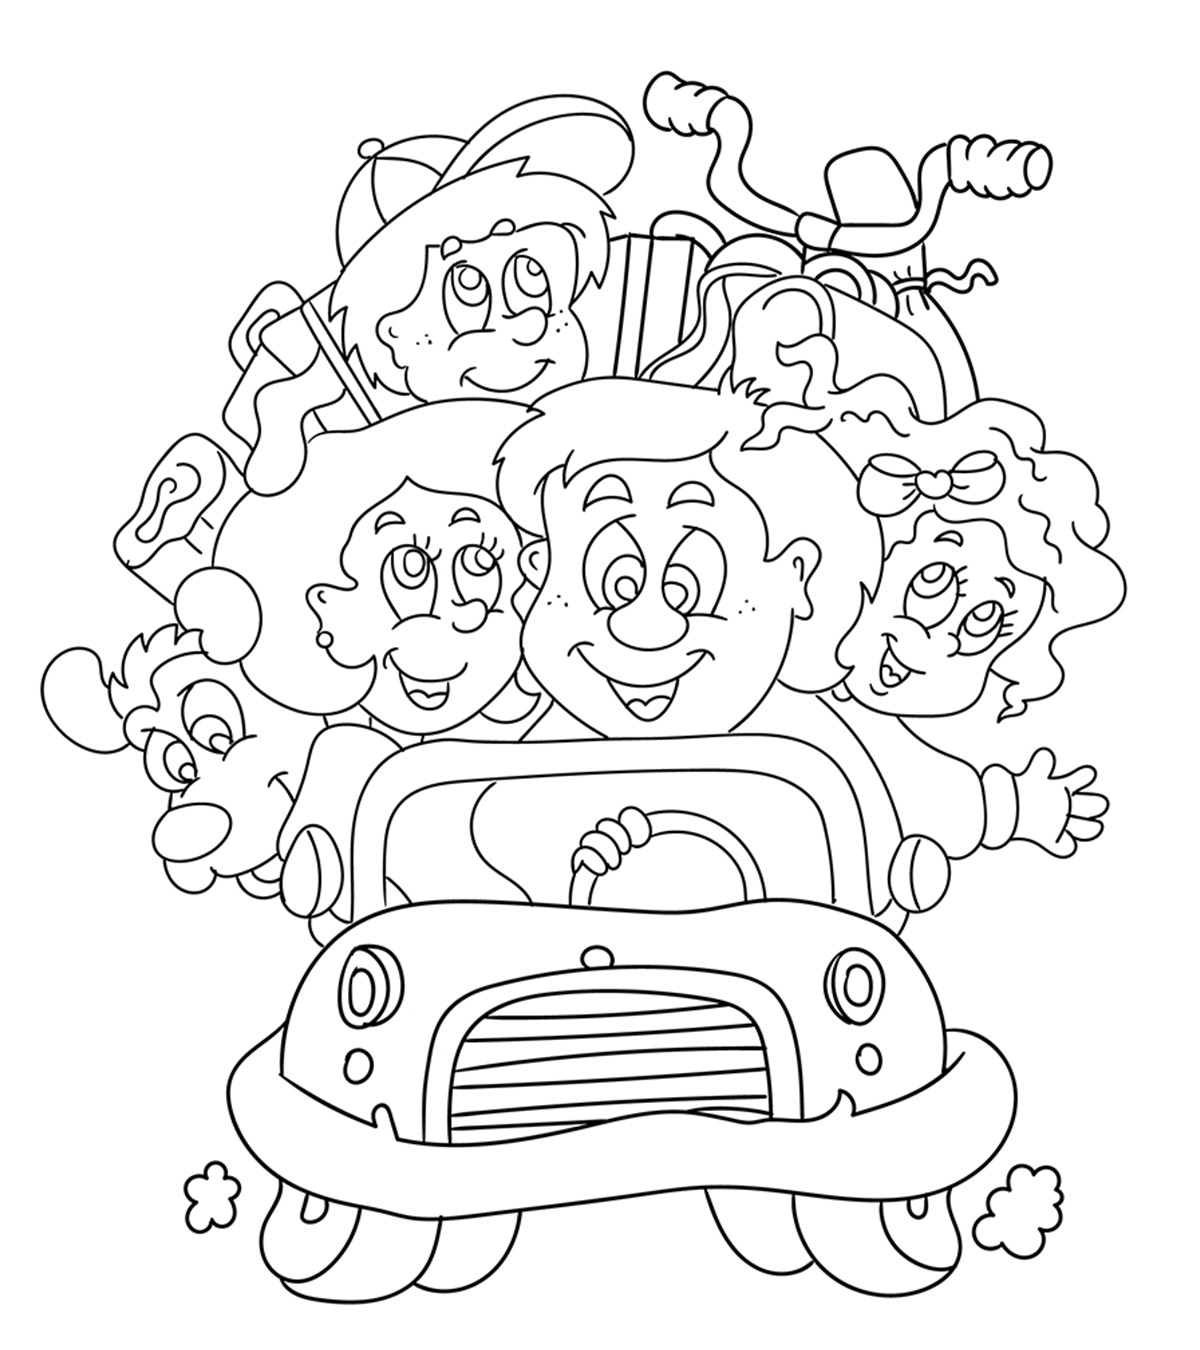 Top 10 Family Coloring Pages For Your Toddler